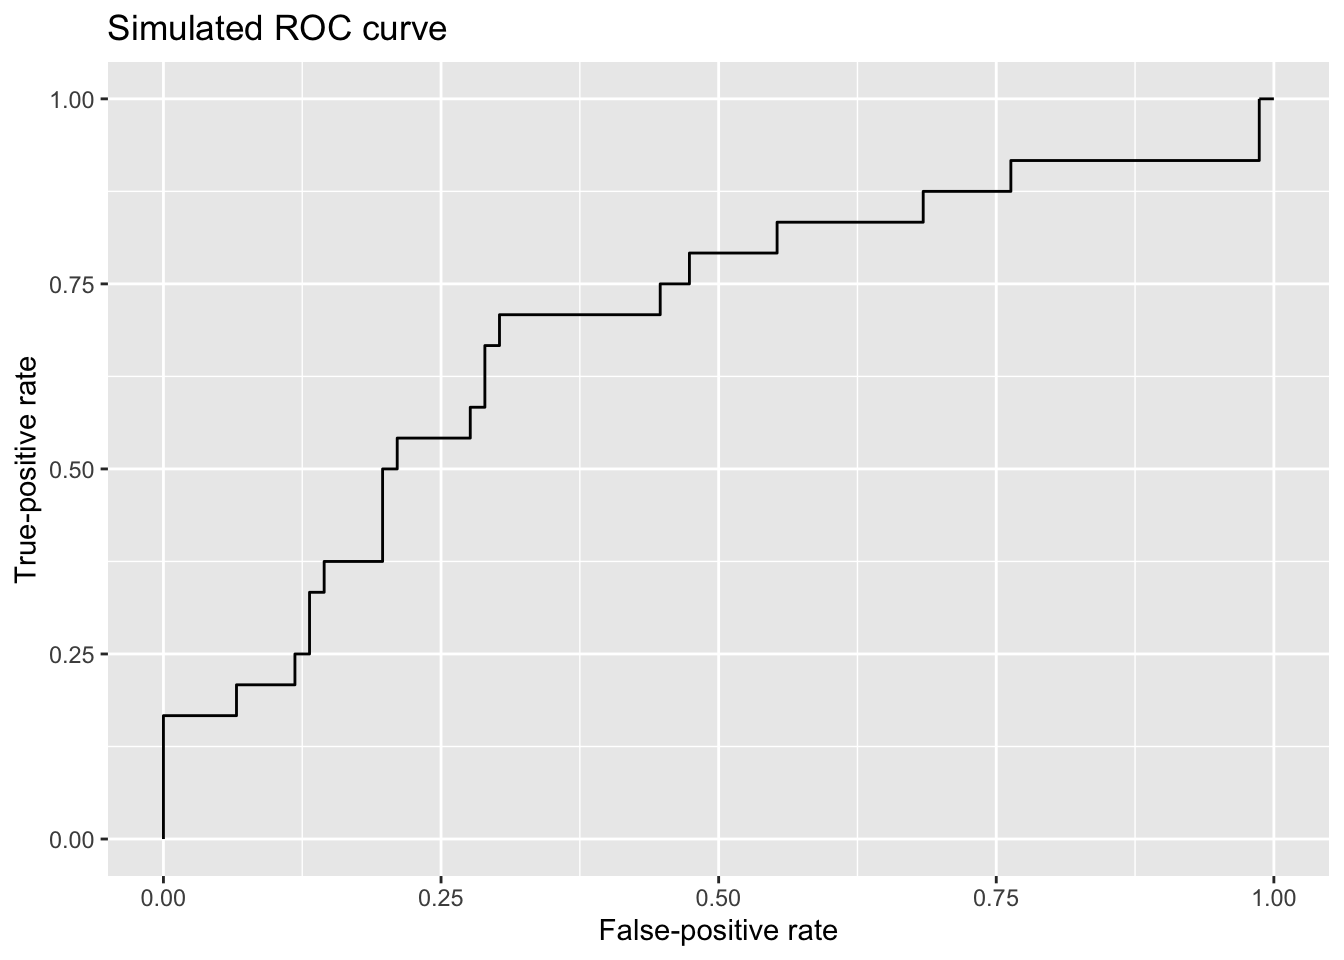 roc curve for model using simulated data